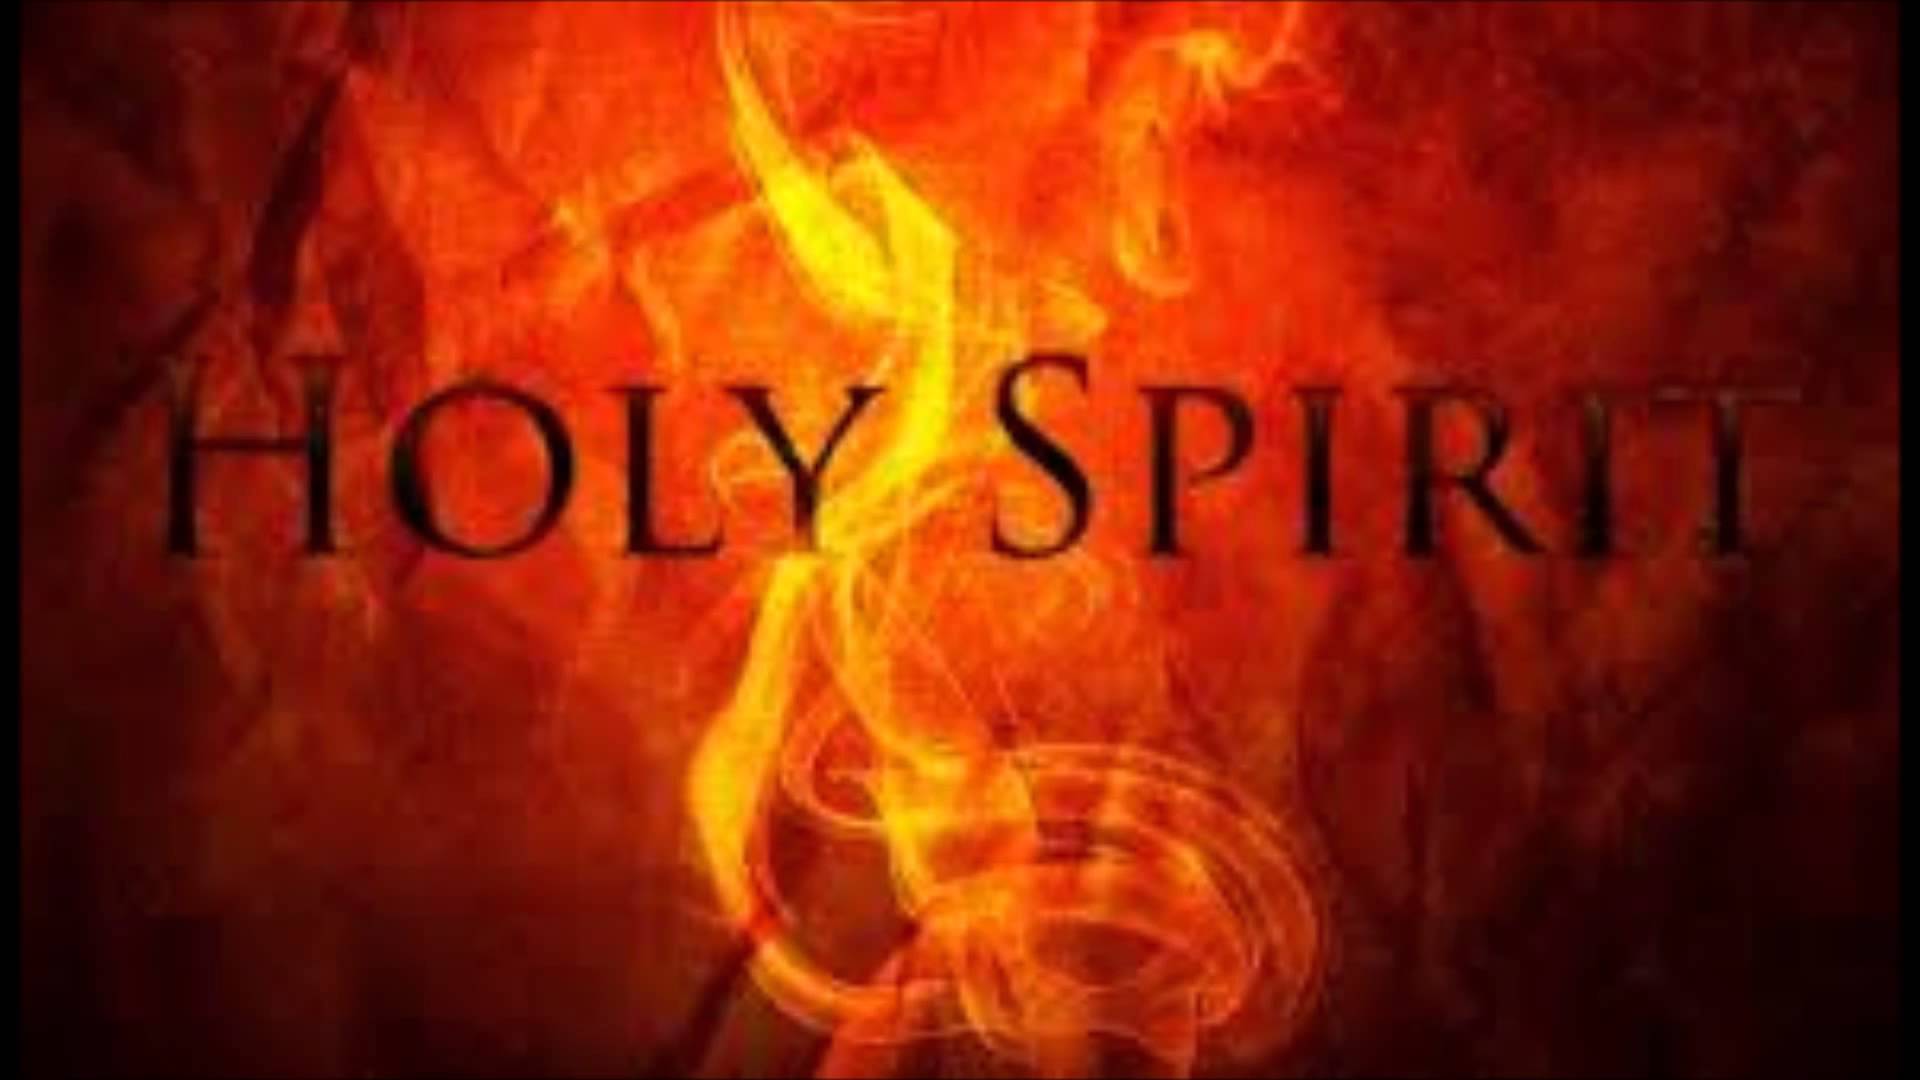 Who or what is the Holy Spirit